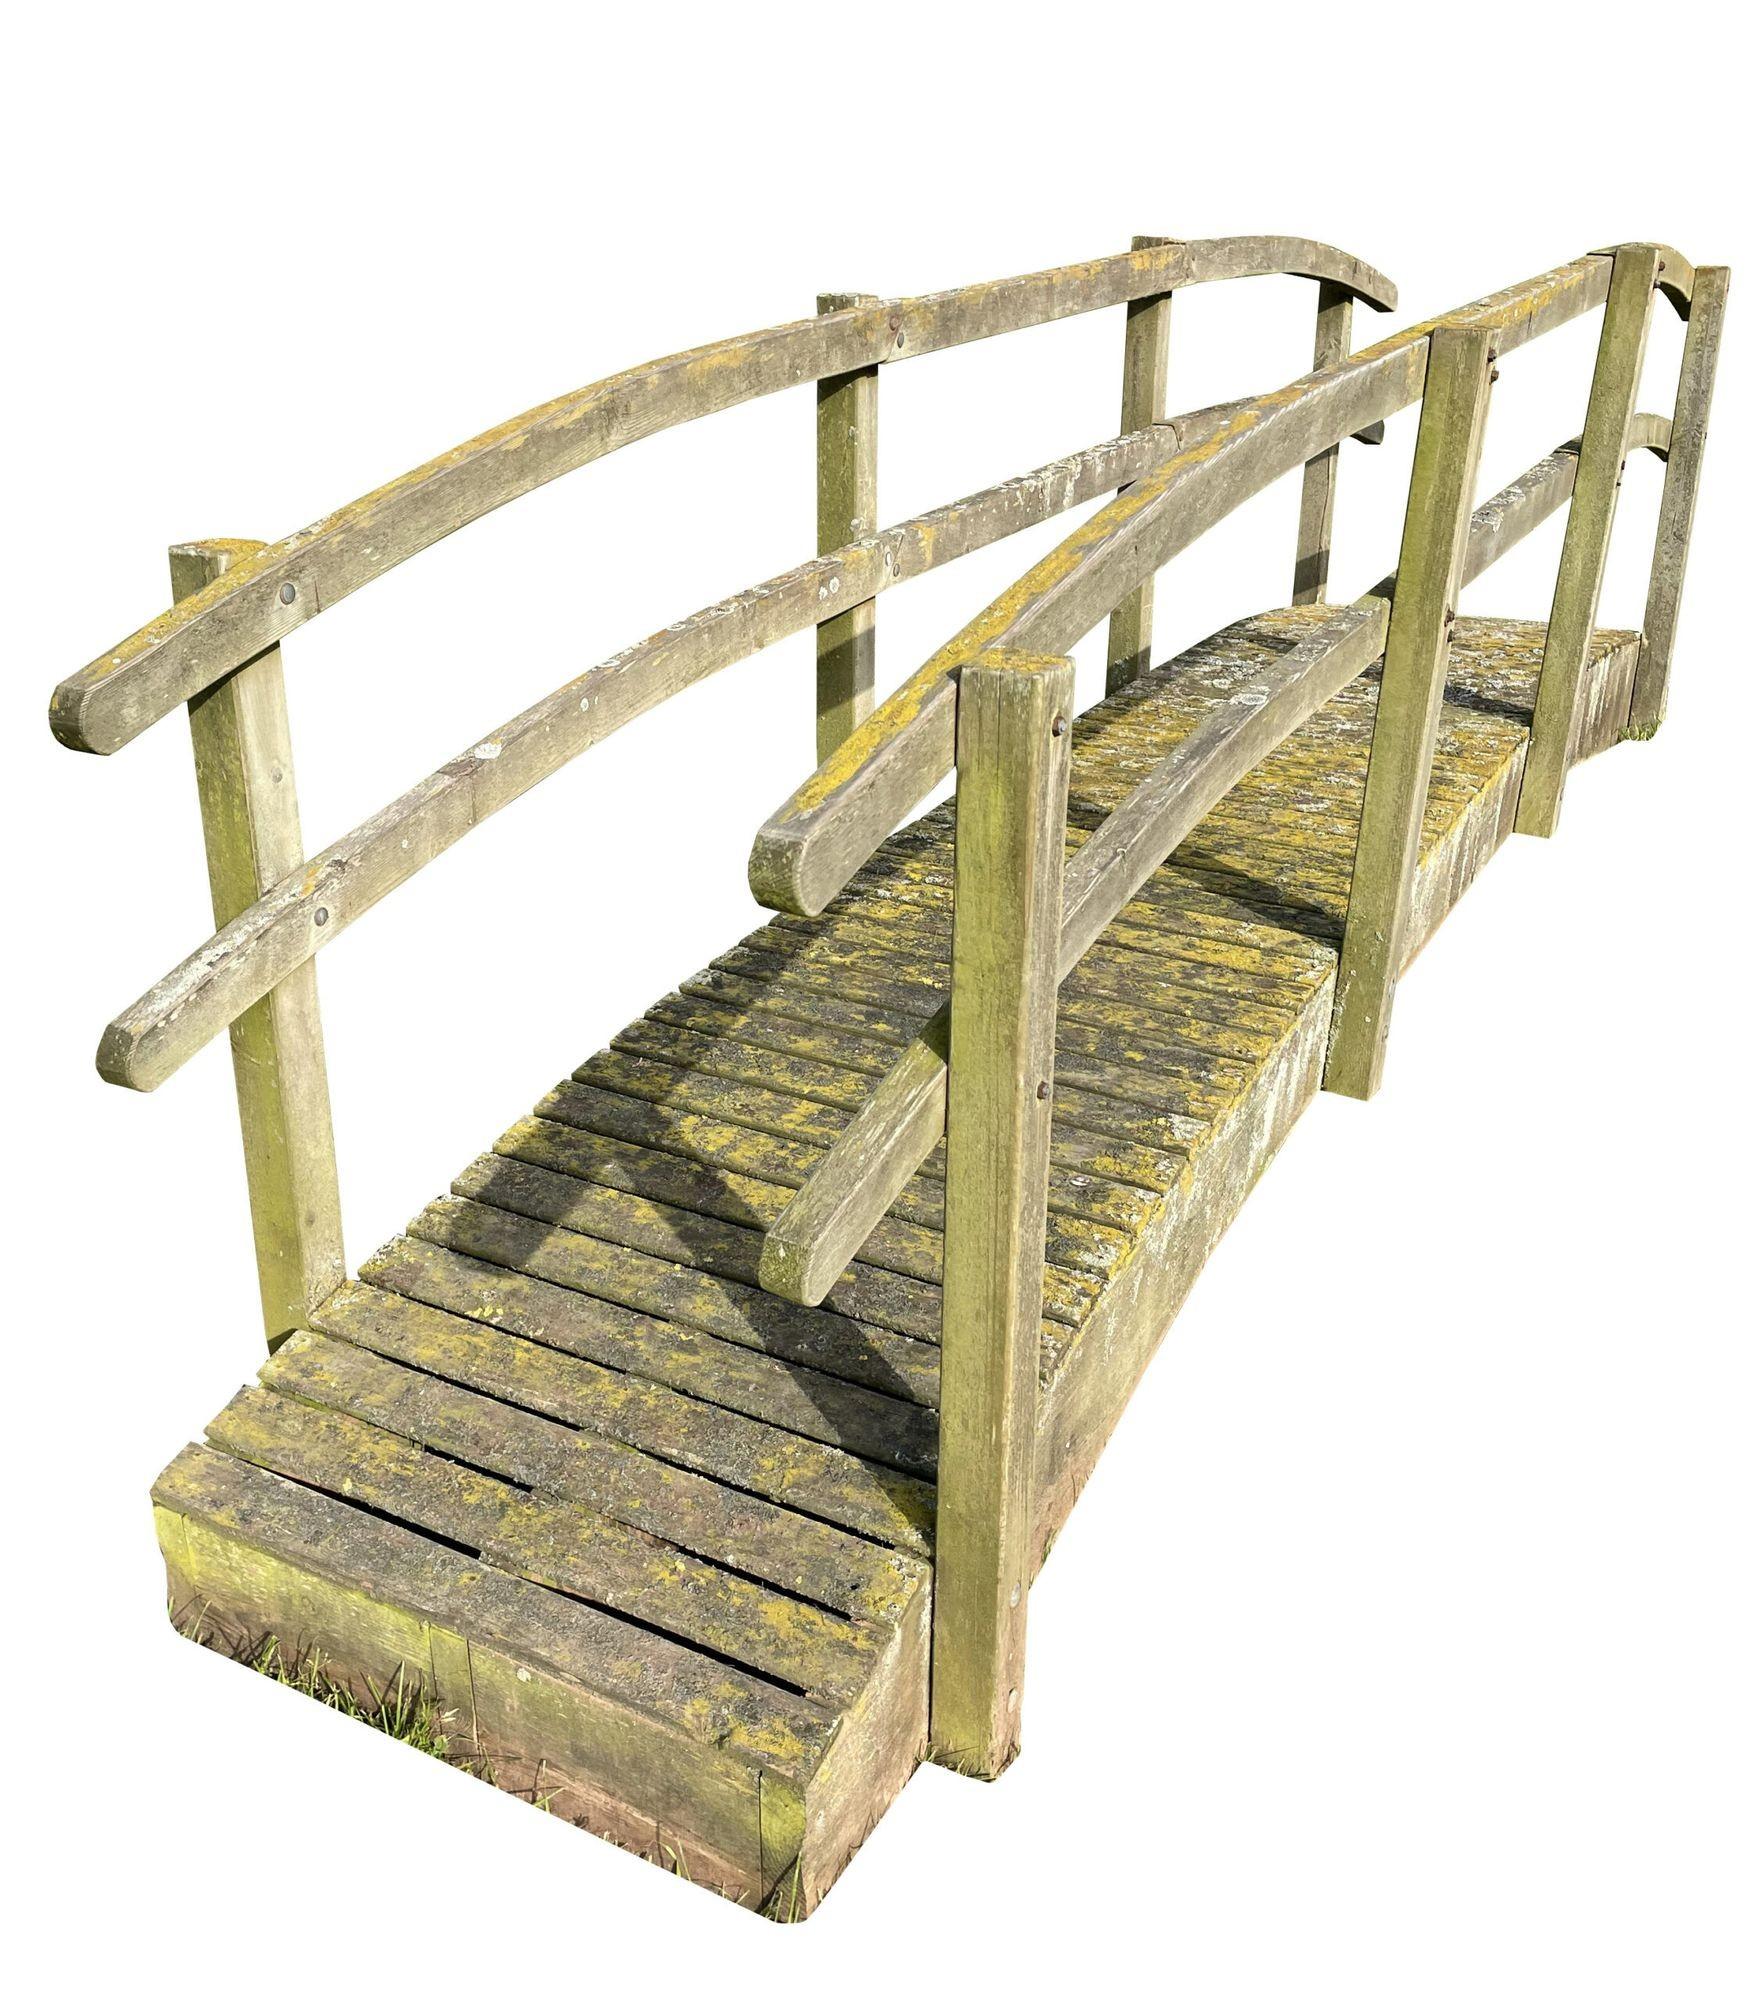 Reclaimed wooden garden footbridge. A wonderfully weathered footbridge with a great look to it. The bridge is in good condition and would make a beautiful addition to a garden.